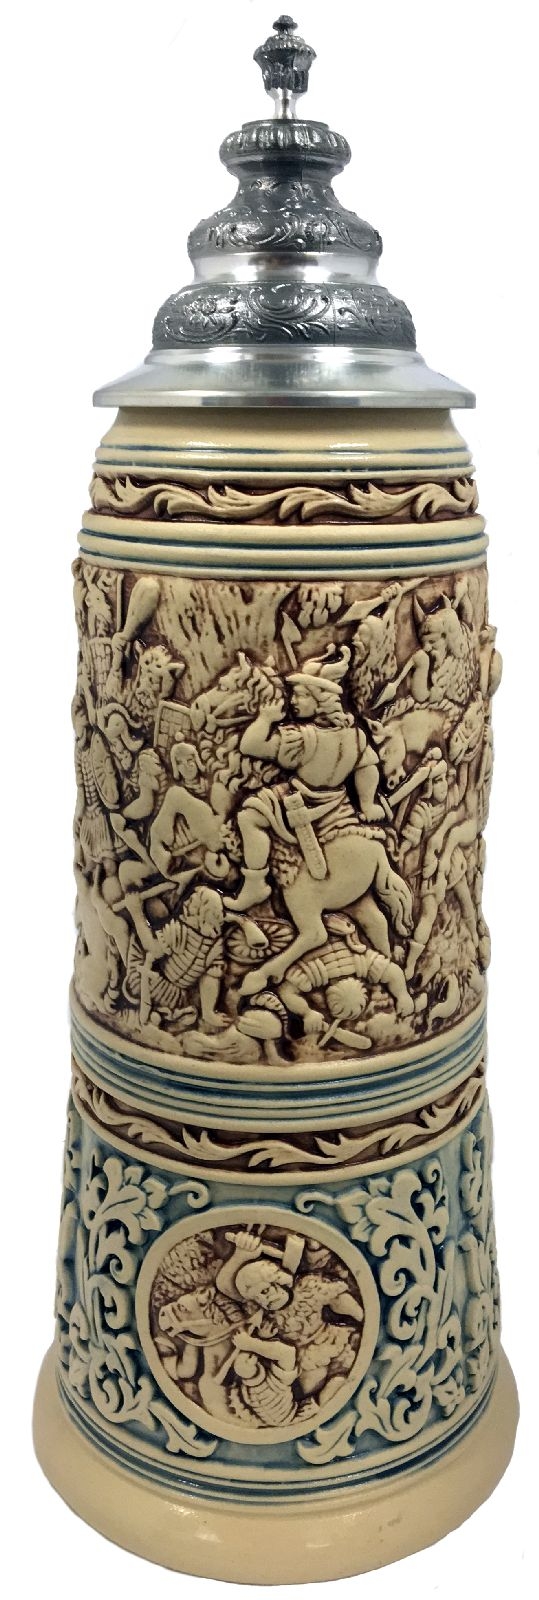 Battle of Teutoburg Forest Relief Limitaet LE German Beer Stein 2 L Made Germany